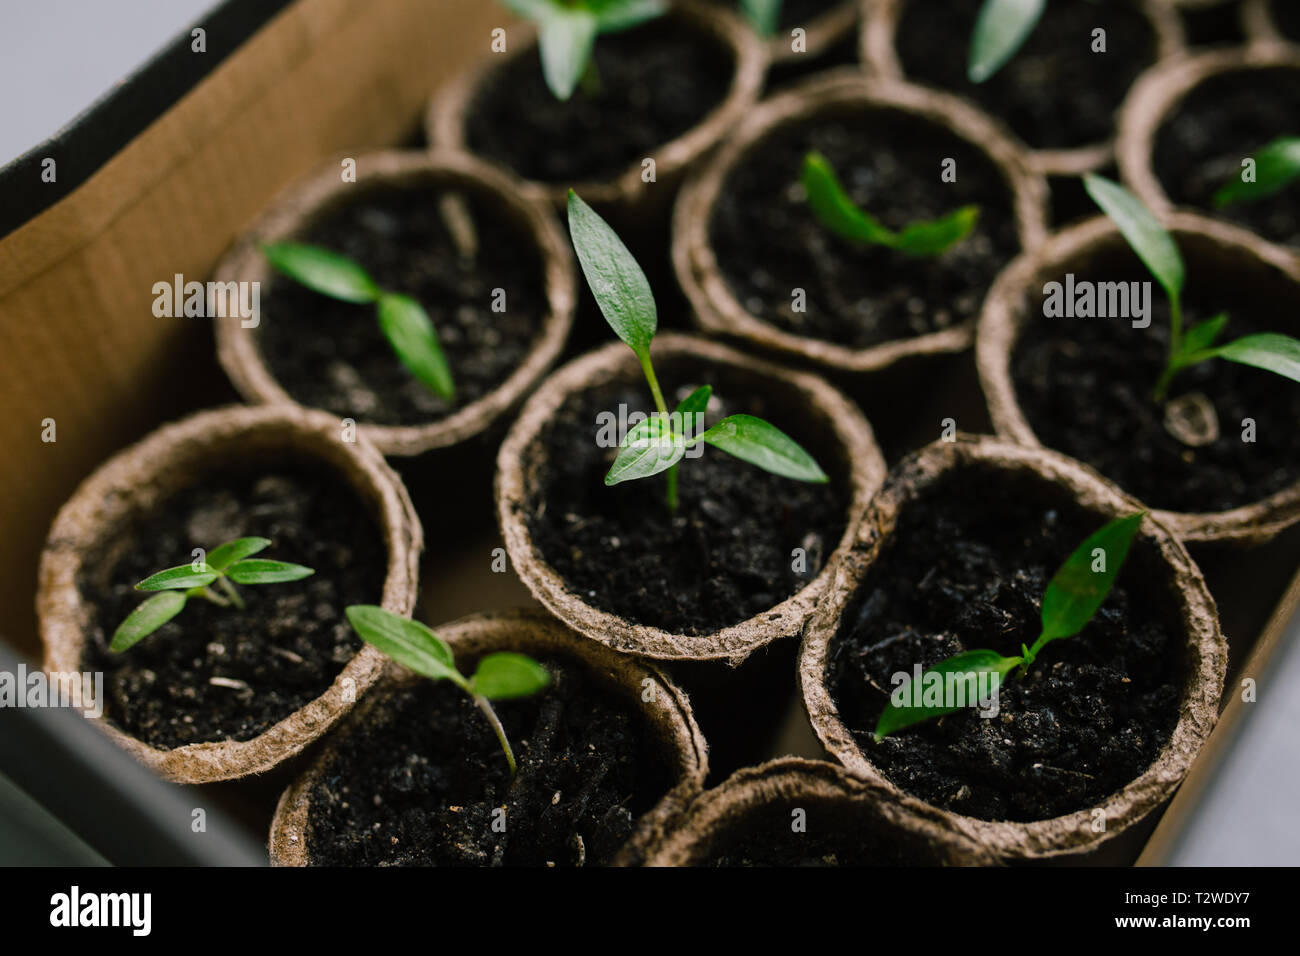 Gardening background. Young fresh seedling growing in pot. Closeup seedlings potted in peat tray. New life. The young plant grows from the soil. Stock Photo